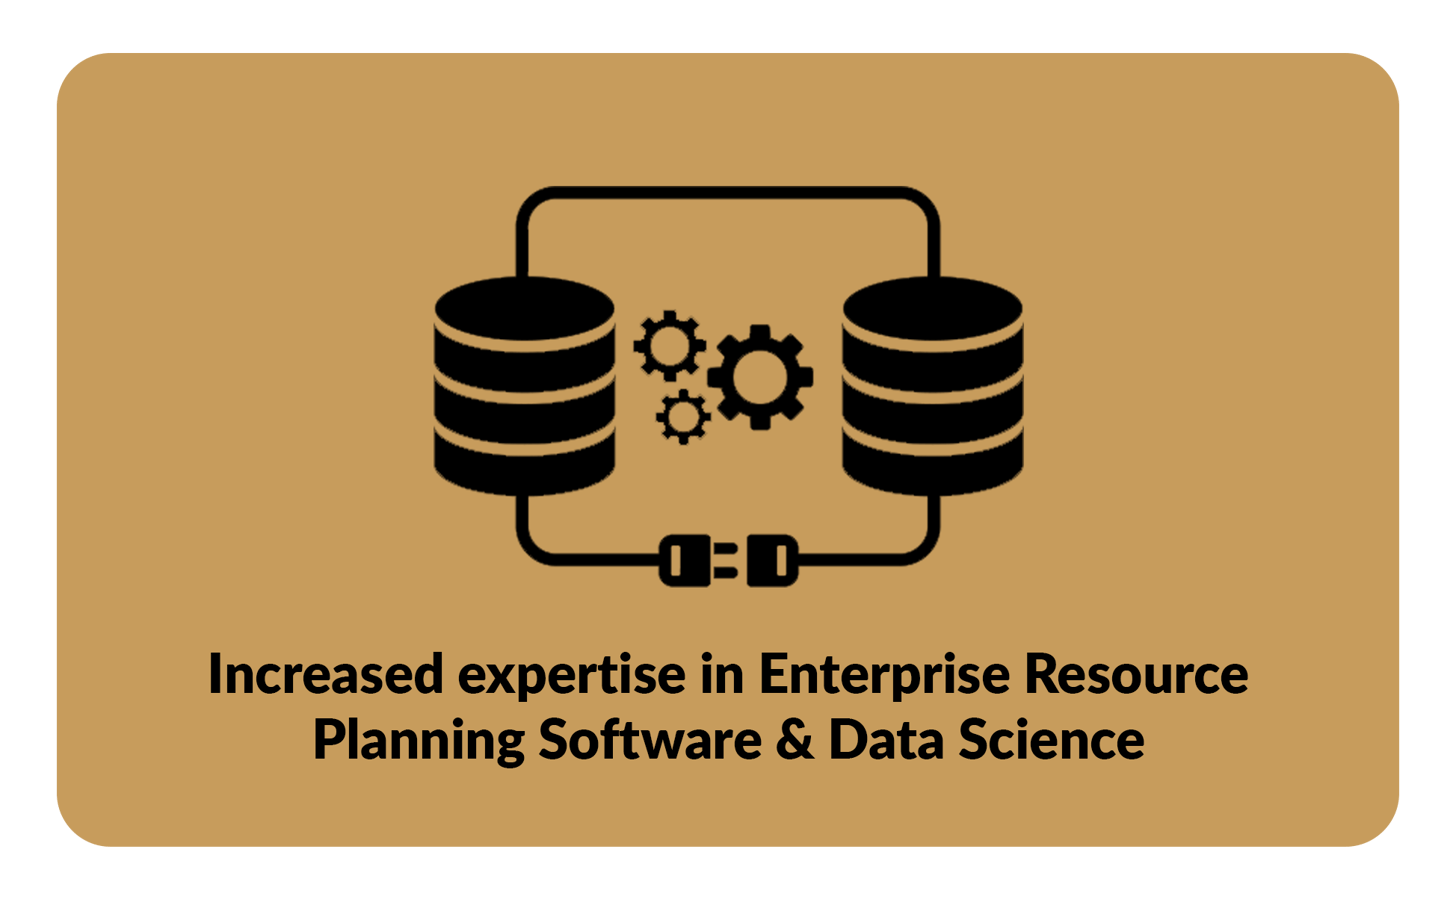 Expertise Resource